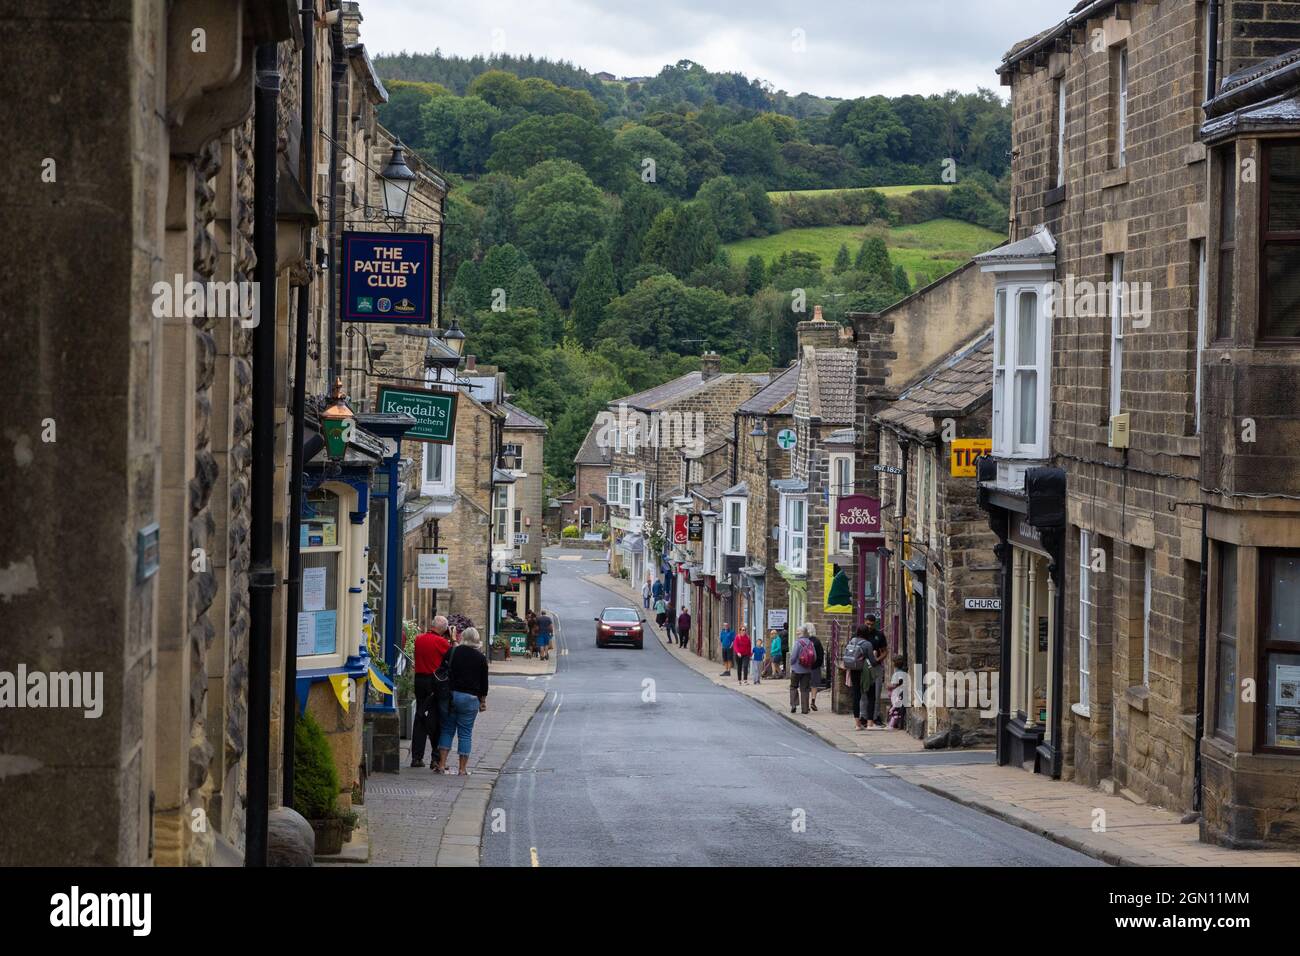 Pateley Bridge North Yorkshire. A view looking down the main street of Pateley. Trees and hills in the distance. Stock Photo